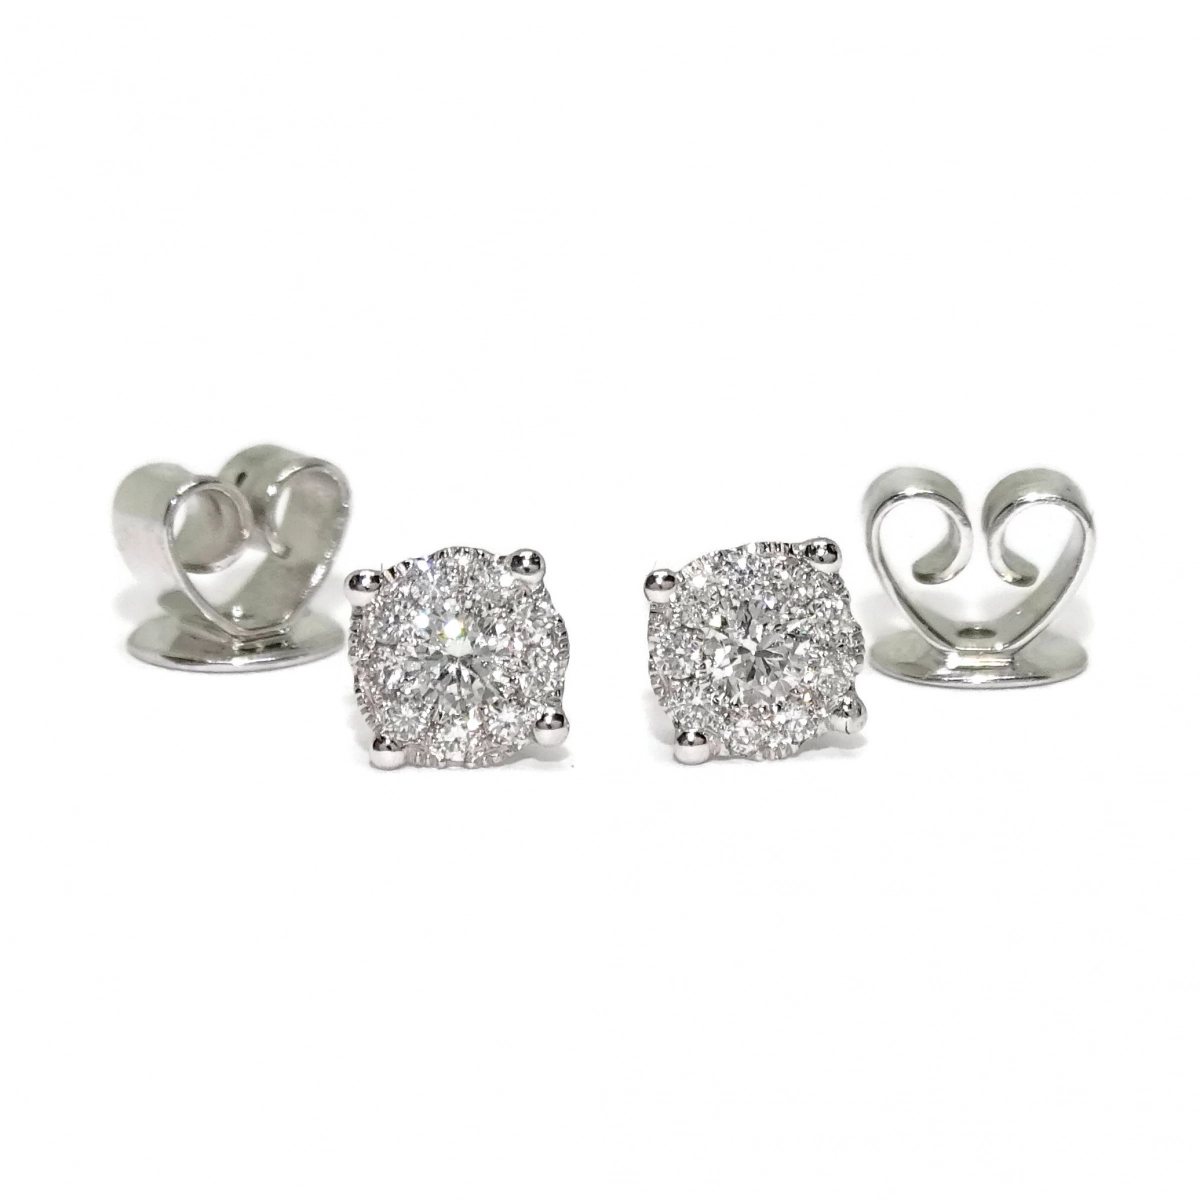 DIAMOND EARRINGS 0.26 CTS IN 18K WHITE GOLD WITH INVISIBLE SET AND CLOSING PRESSURE. 5MM NEVER SAY NEVER